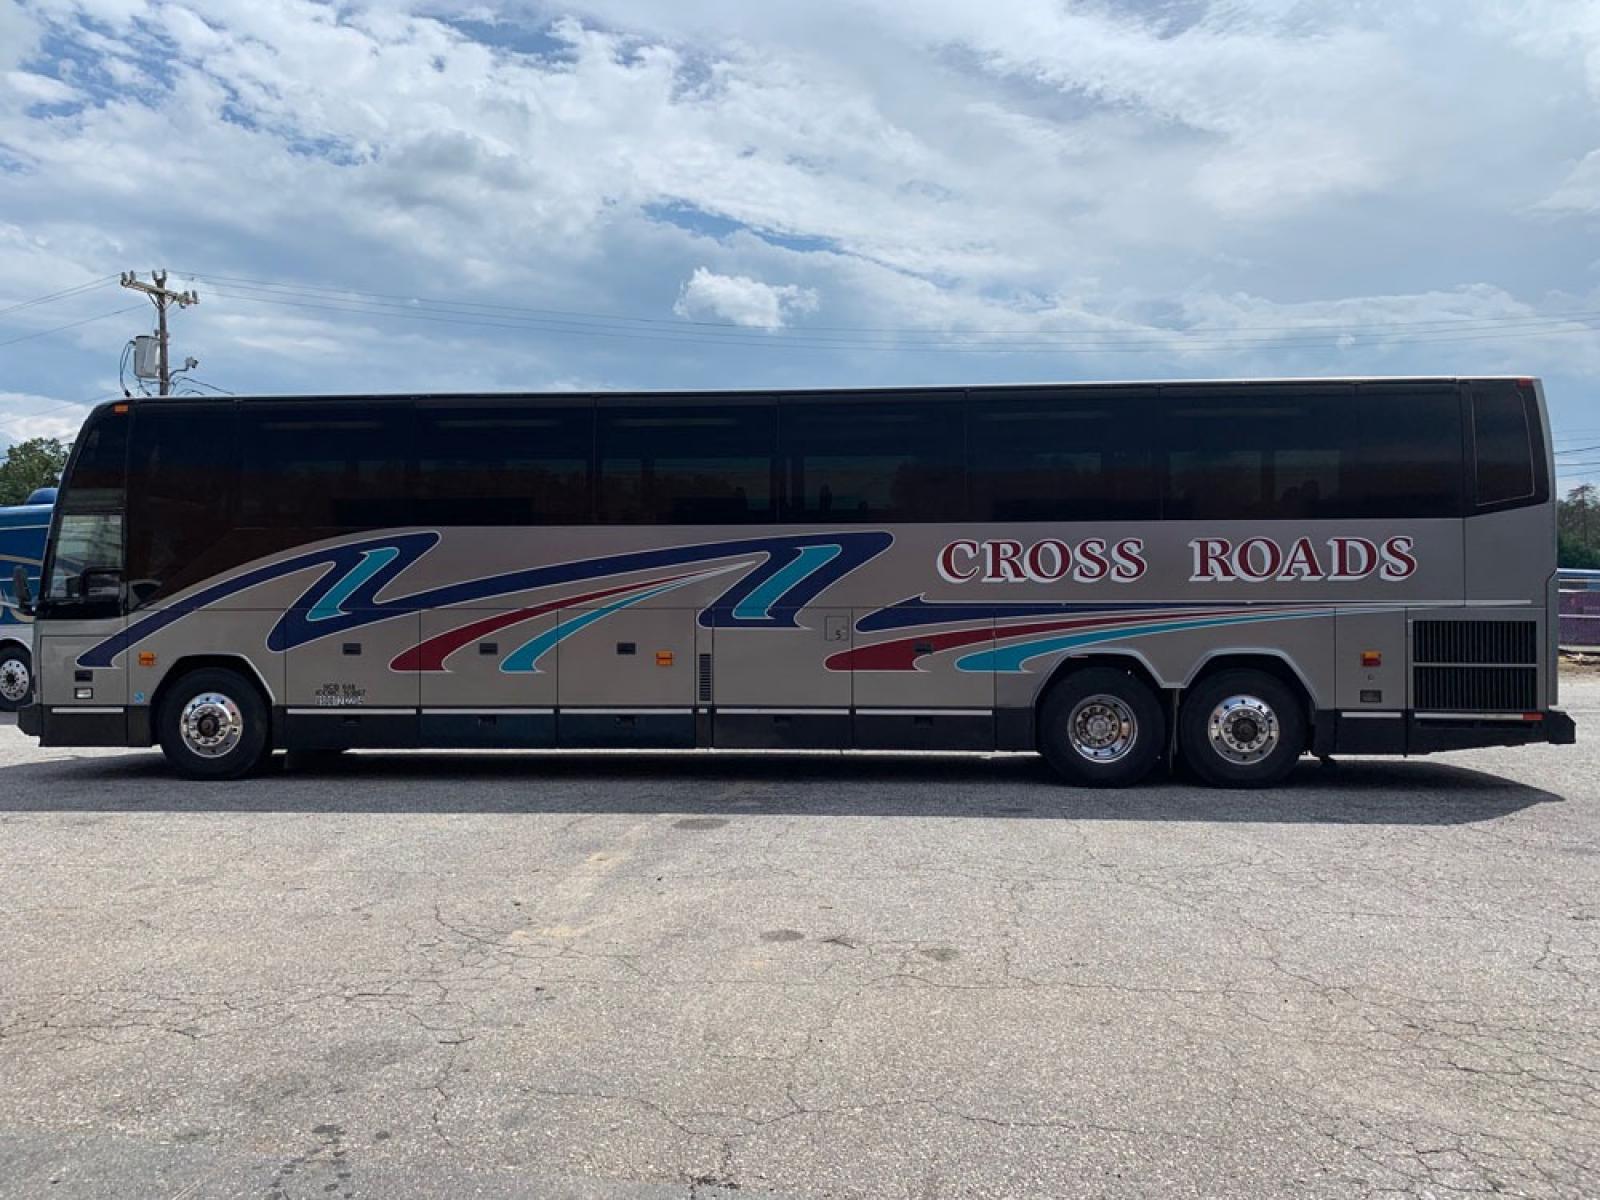 1998 Prevost HS-45 with an Detroit Diesel Series 60 engine, Allison transmission, 0.000000, 0.000000 - 1998 Prevost H3-45 - Series 60 Detroit Diesel - Allison Automatic Transmission - 45' - 56 Passengers -Enclosed Parcel Racks - 5 Flat Screens and DVD - Photo #4